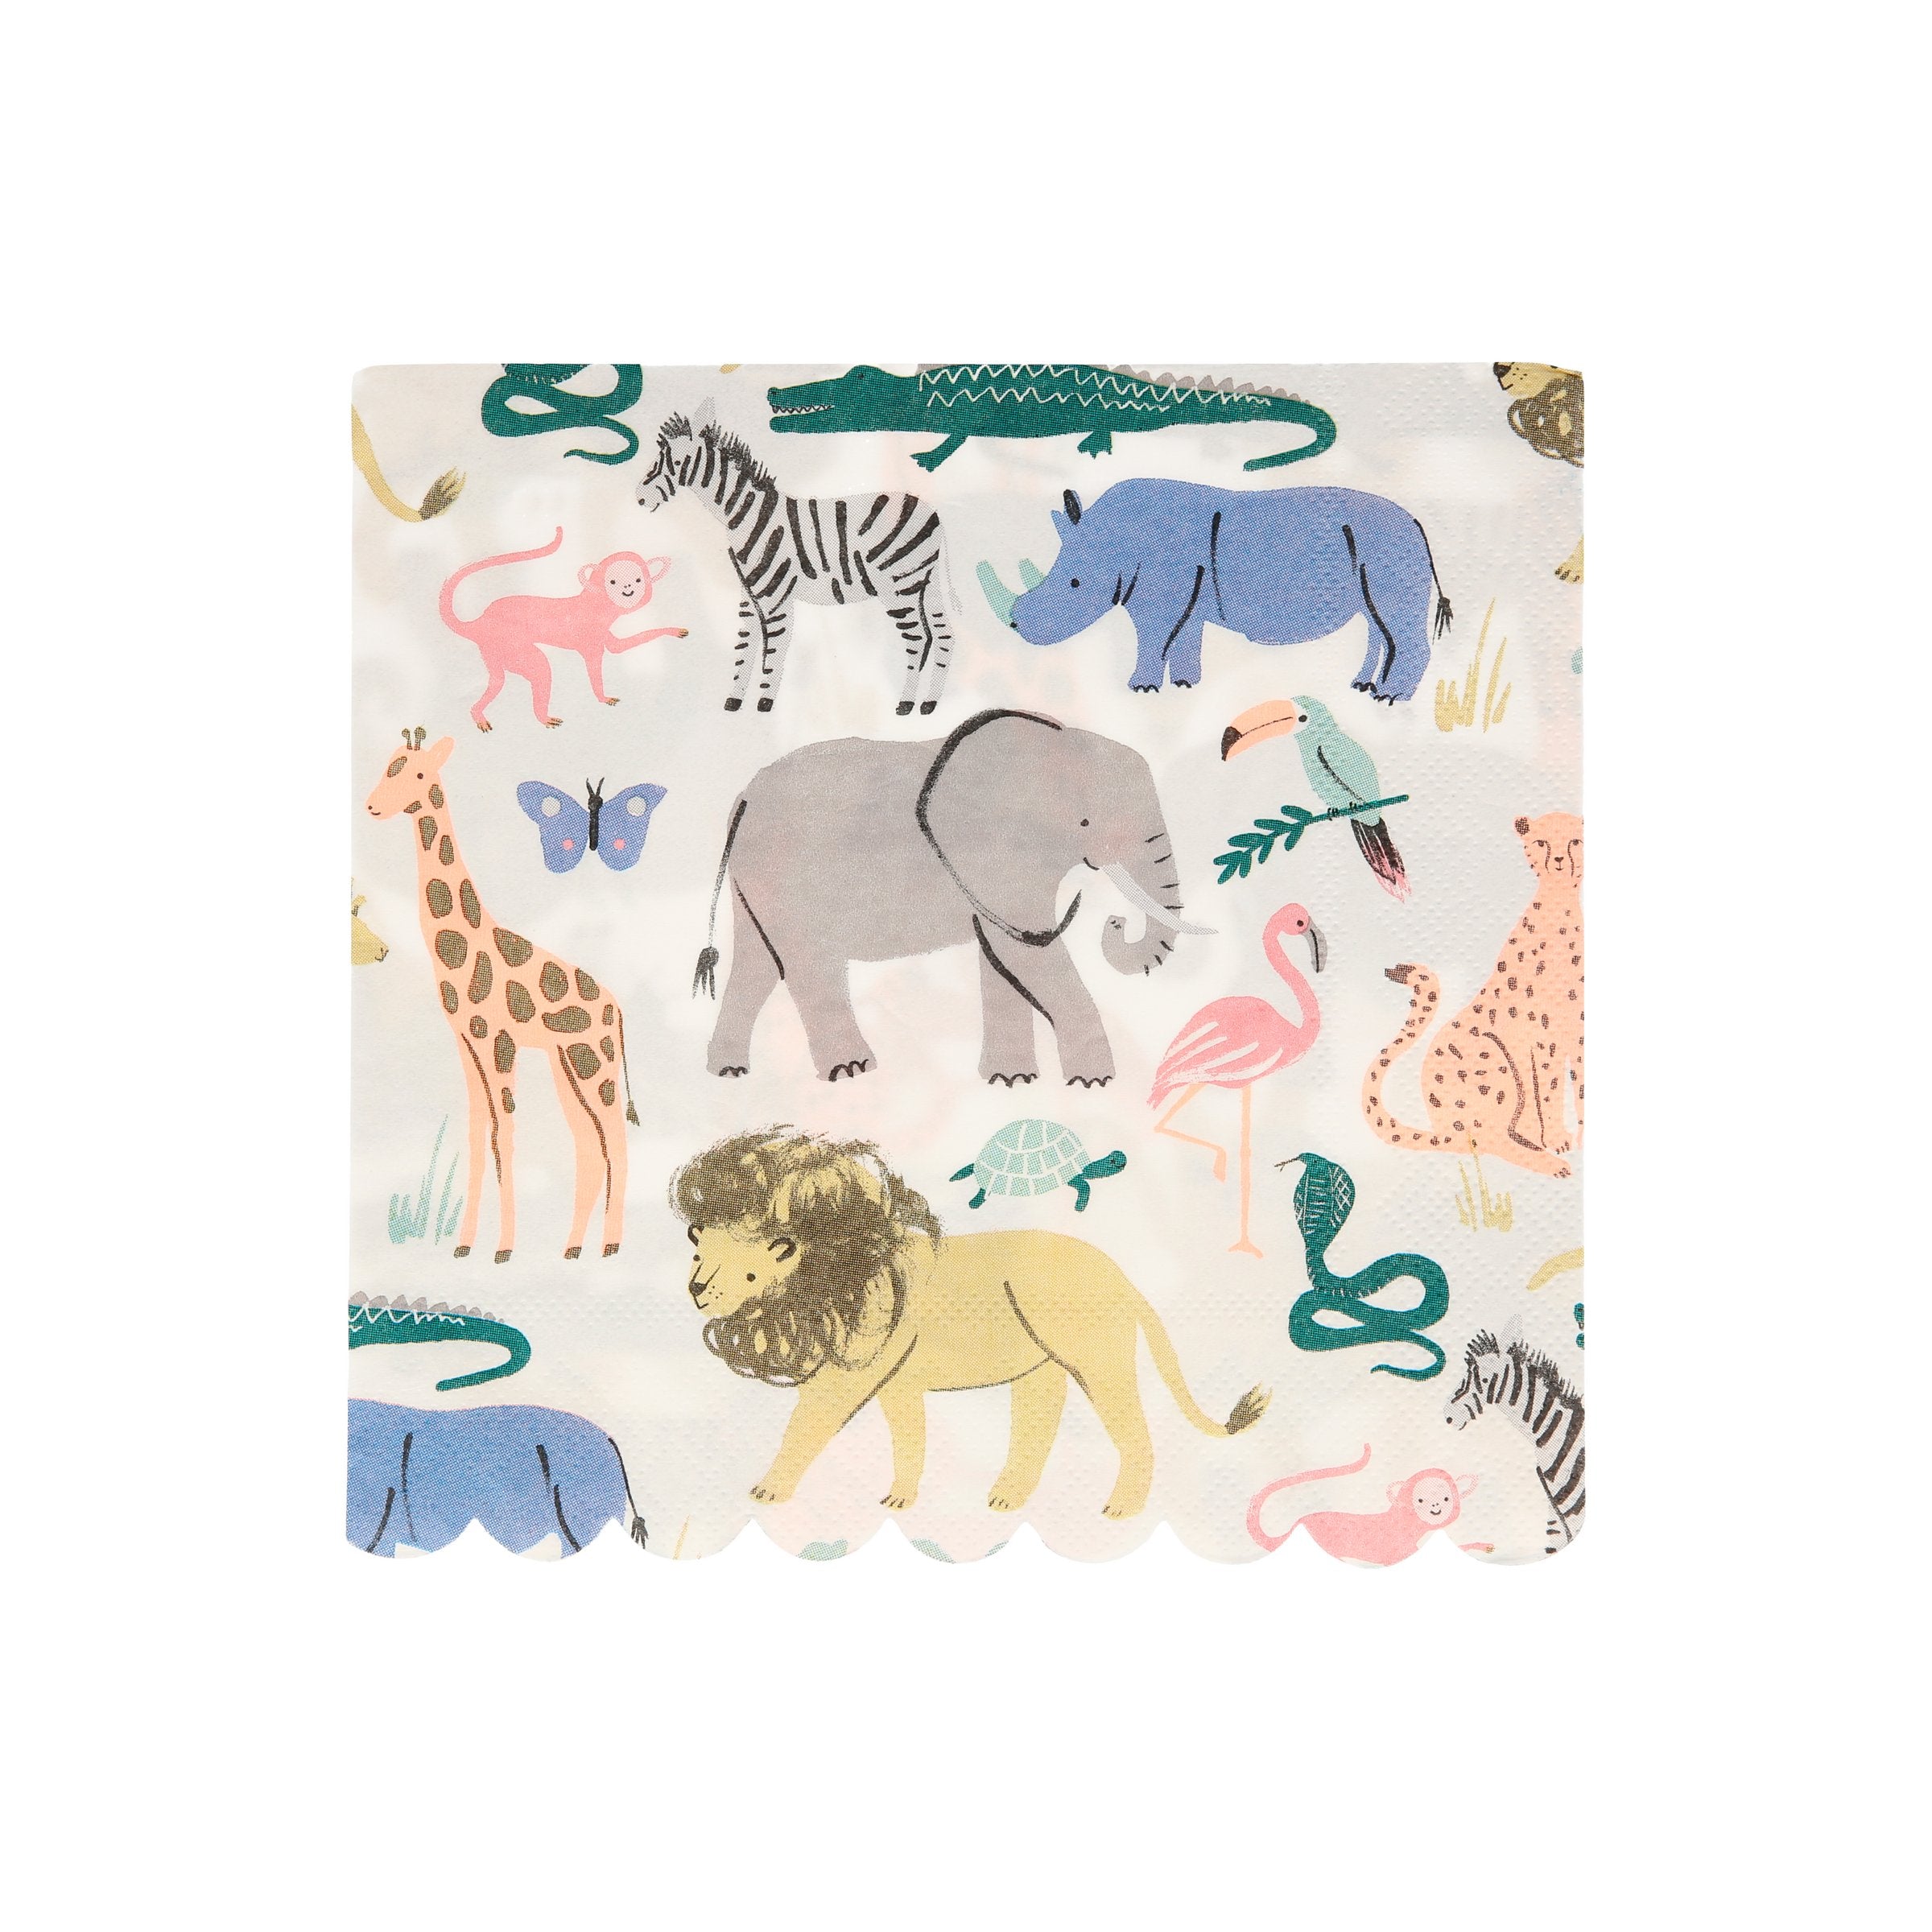 Our 3 play napkins, featuring safari animals, are perfect for a safari party.